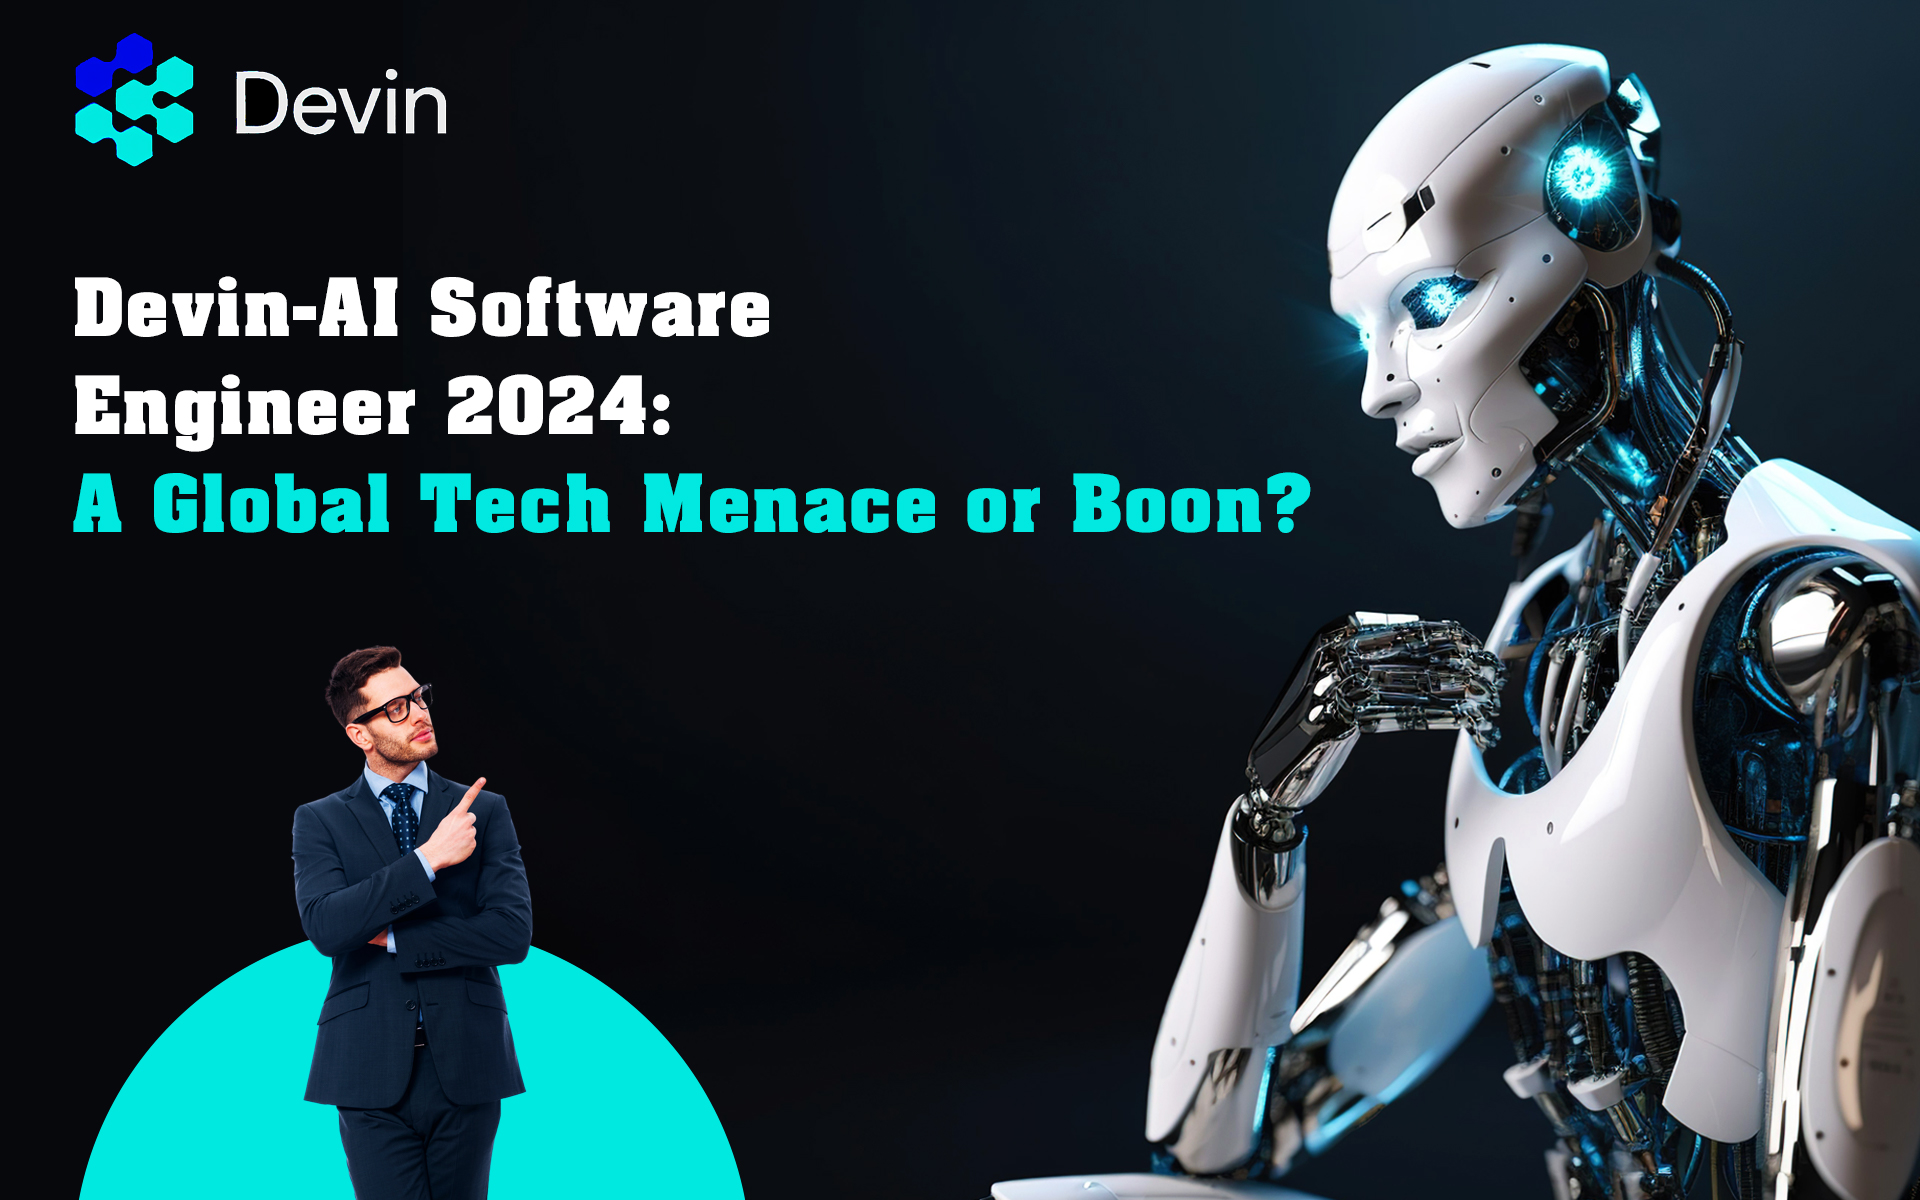 Devin-AI Software Engineer 2024: A Global Tech Menace or Boon